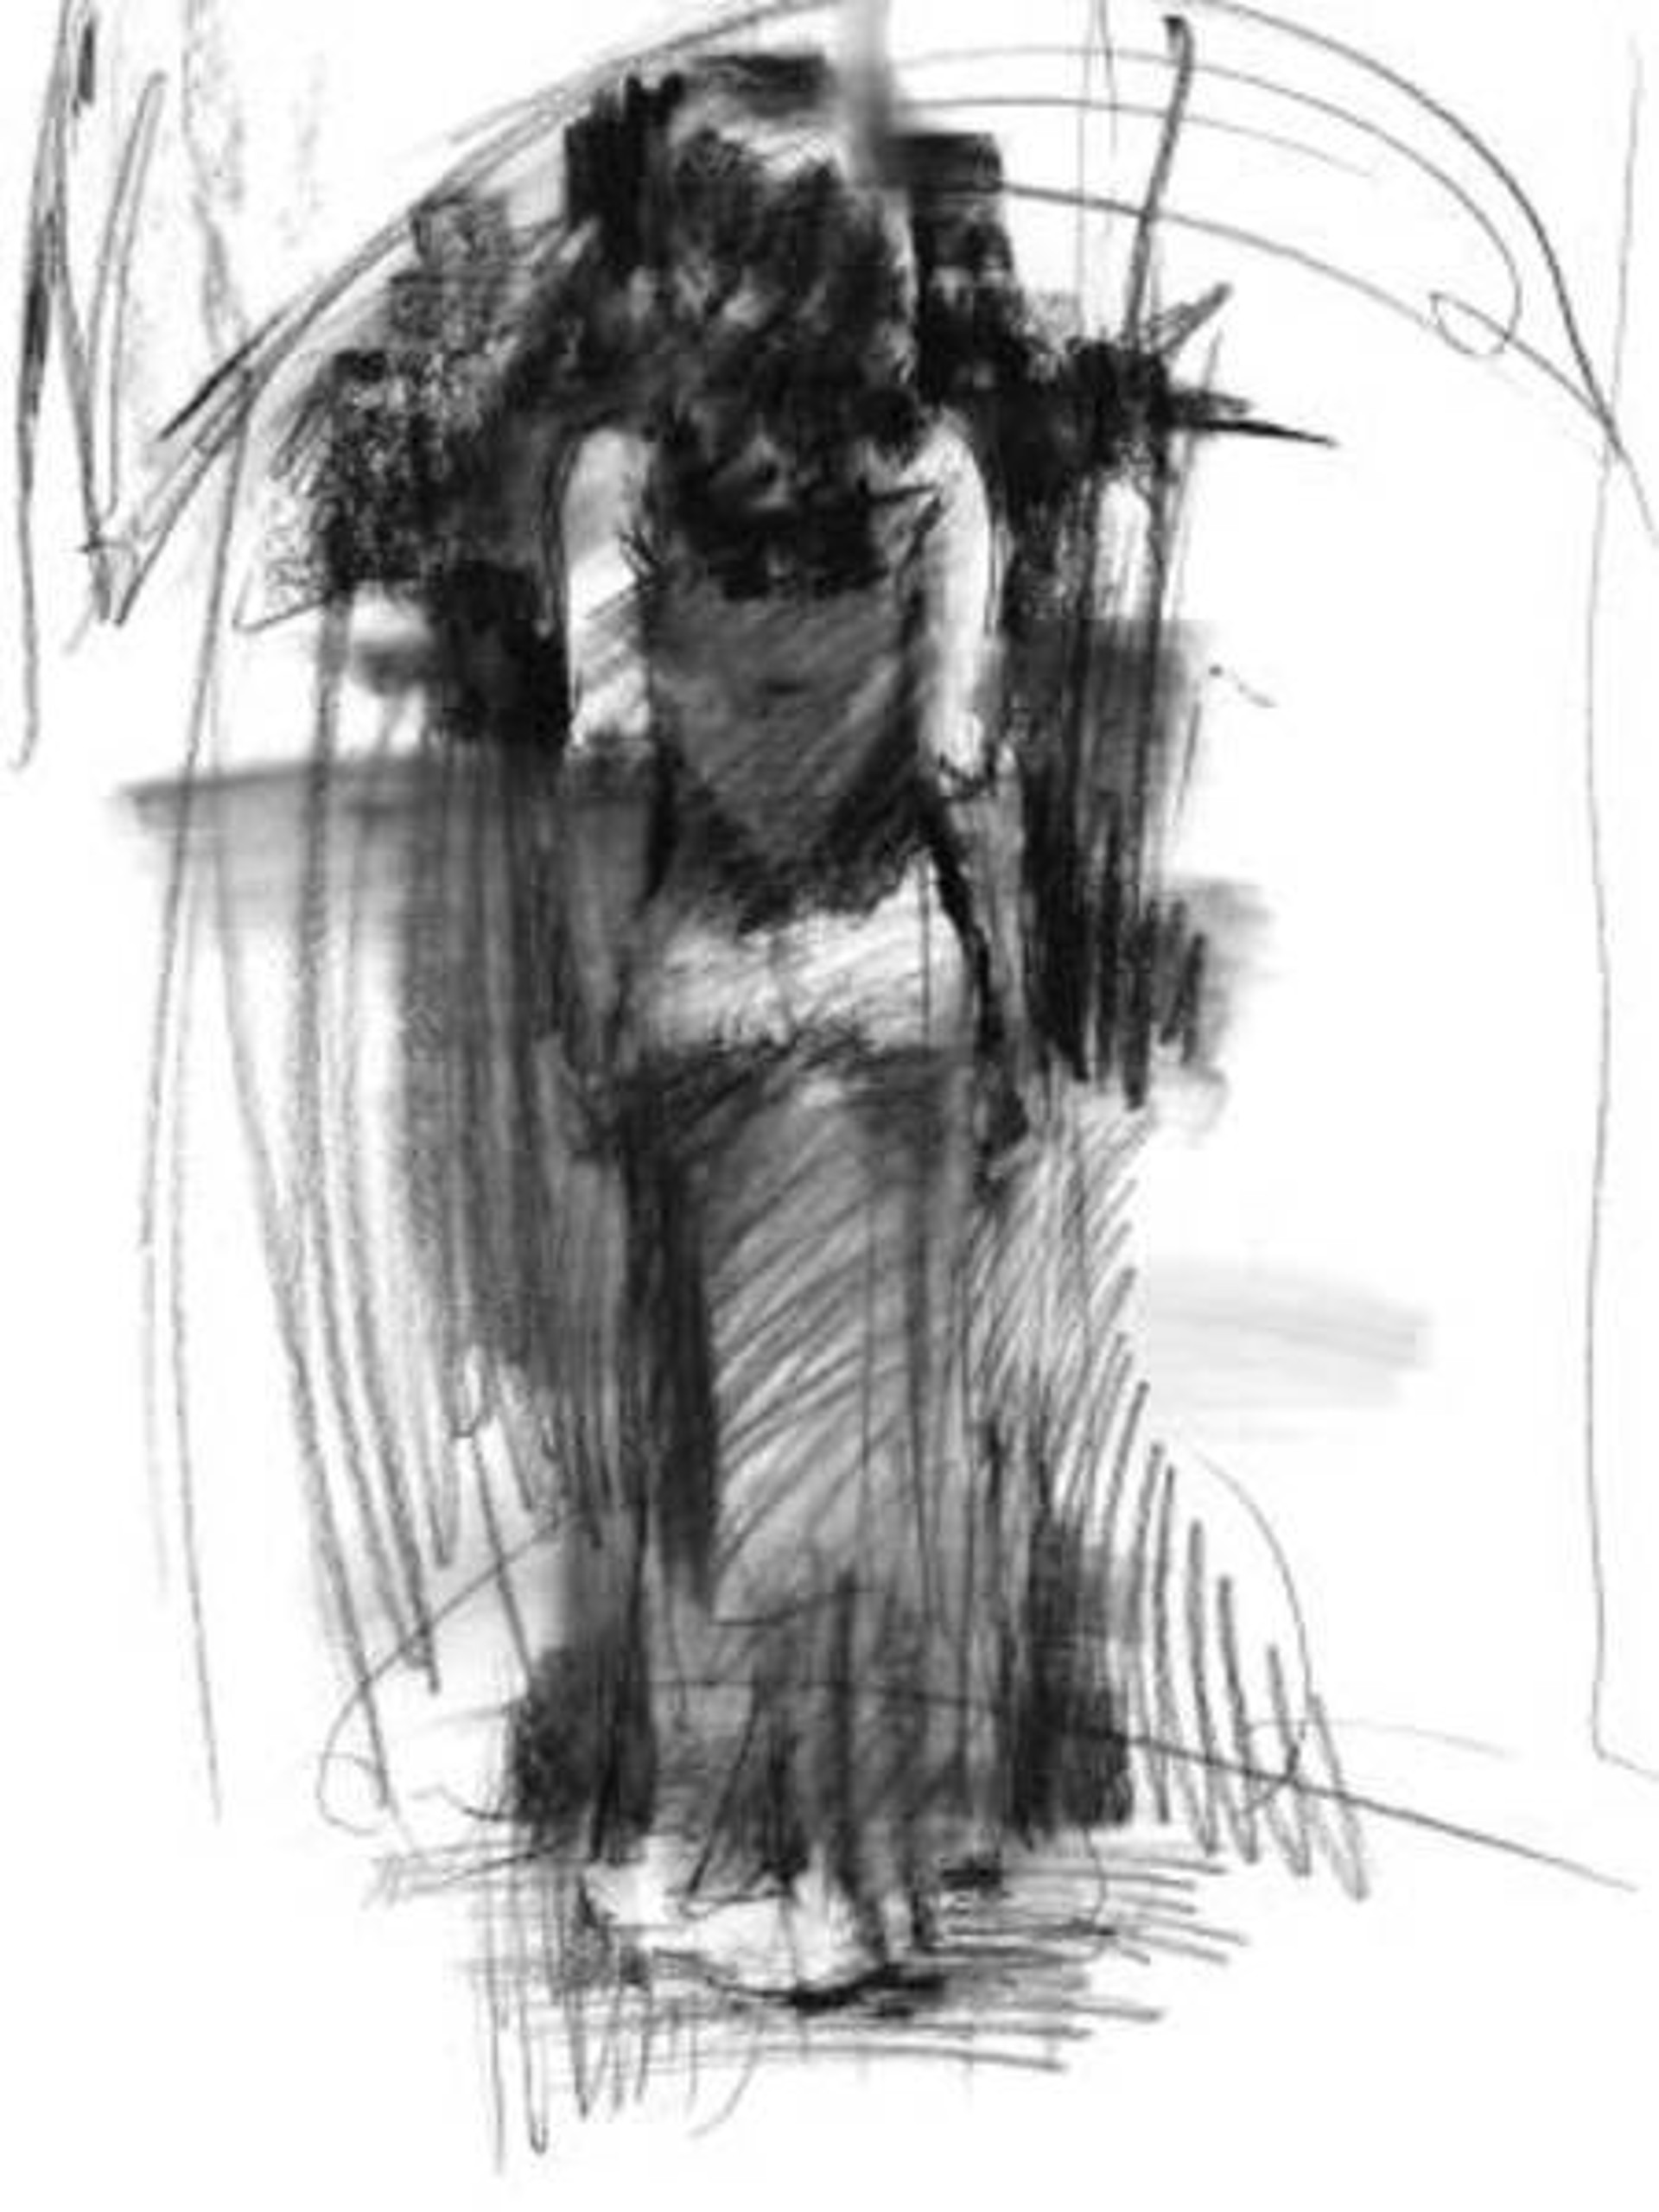 Seduction (Paper) by Henry Asencio